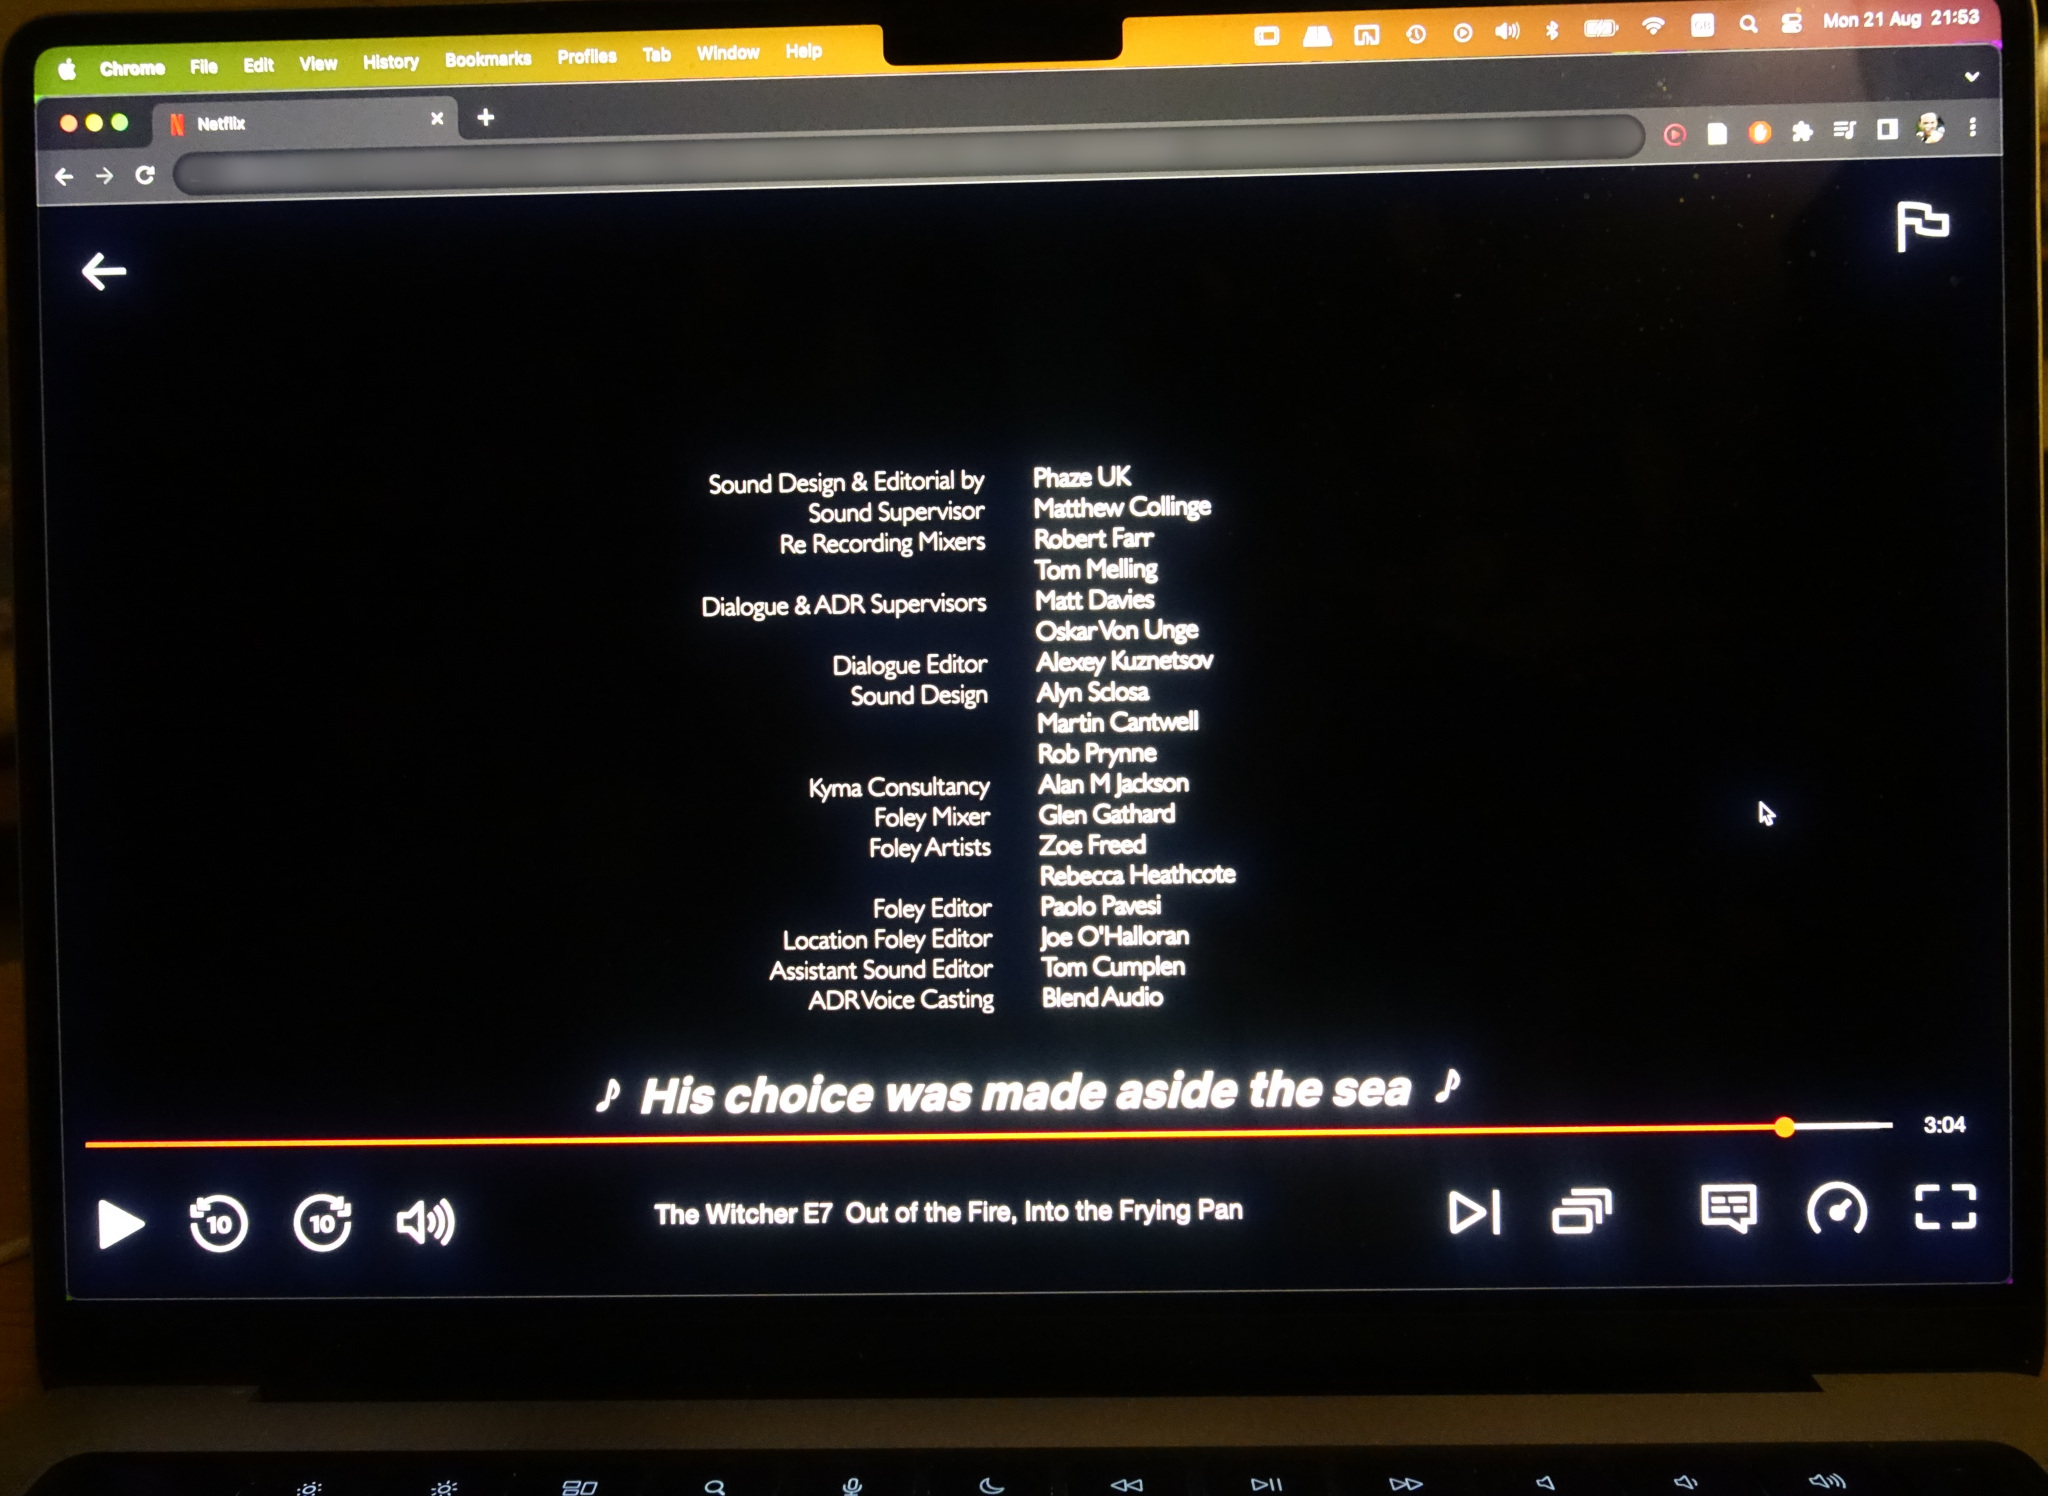 Screenshot of the closing credits for Witcher E7 crediting sound designers from Phaze UK and Alan Jackson, Kyma consultancy